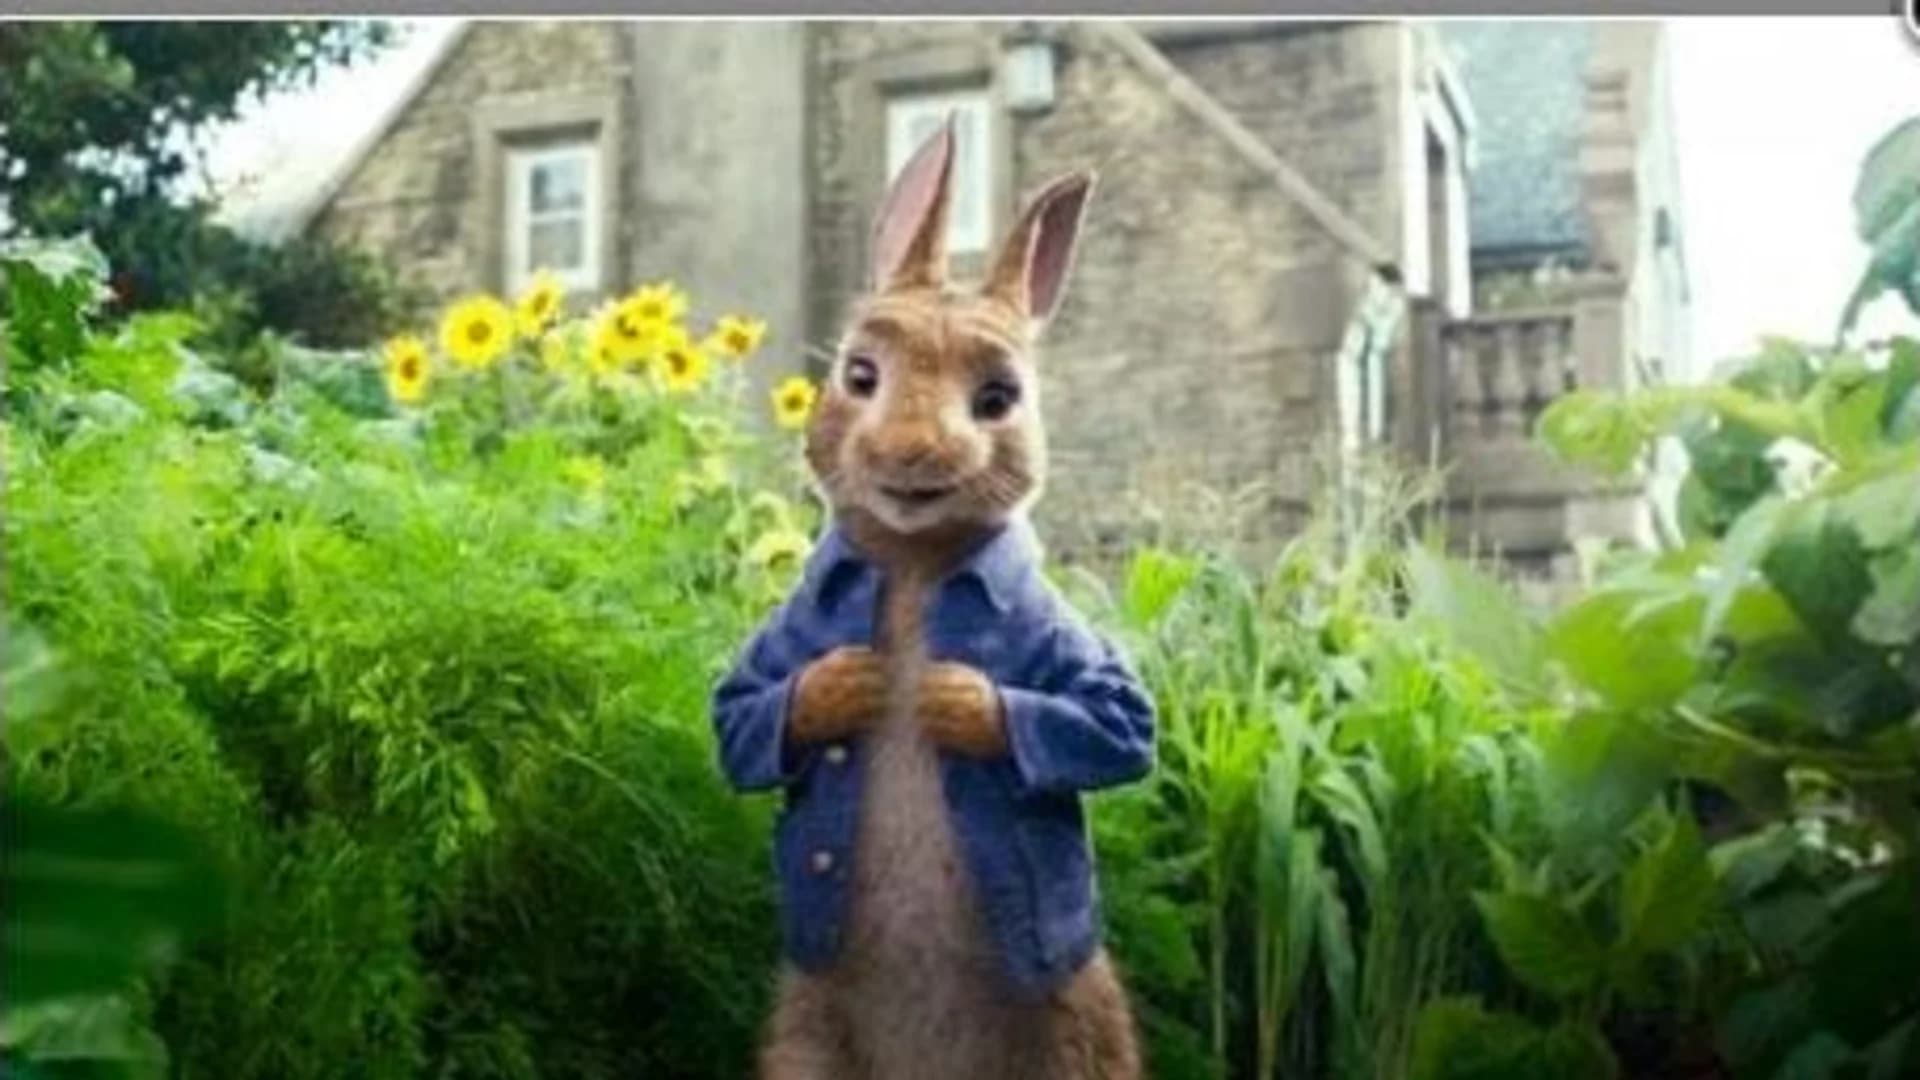 'Peter Rabbit' team apologizes for making light of allergies